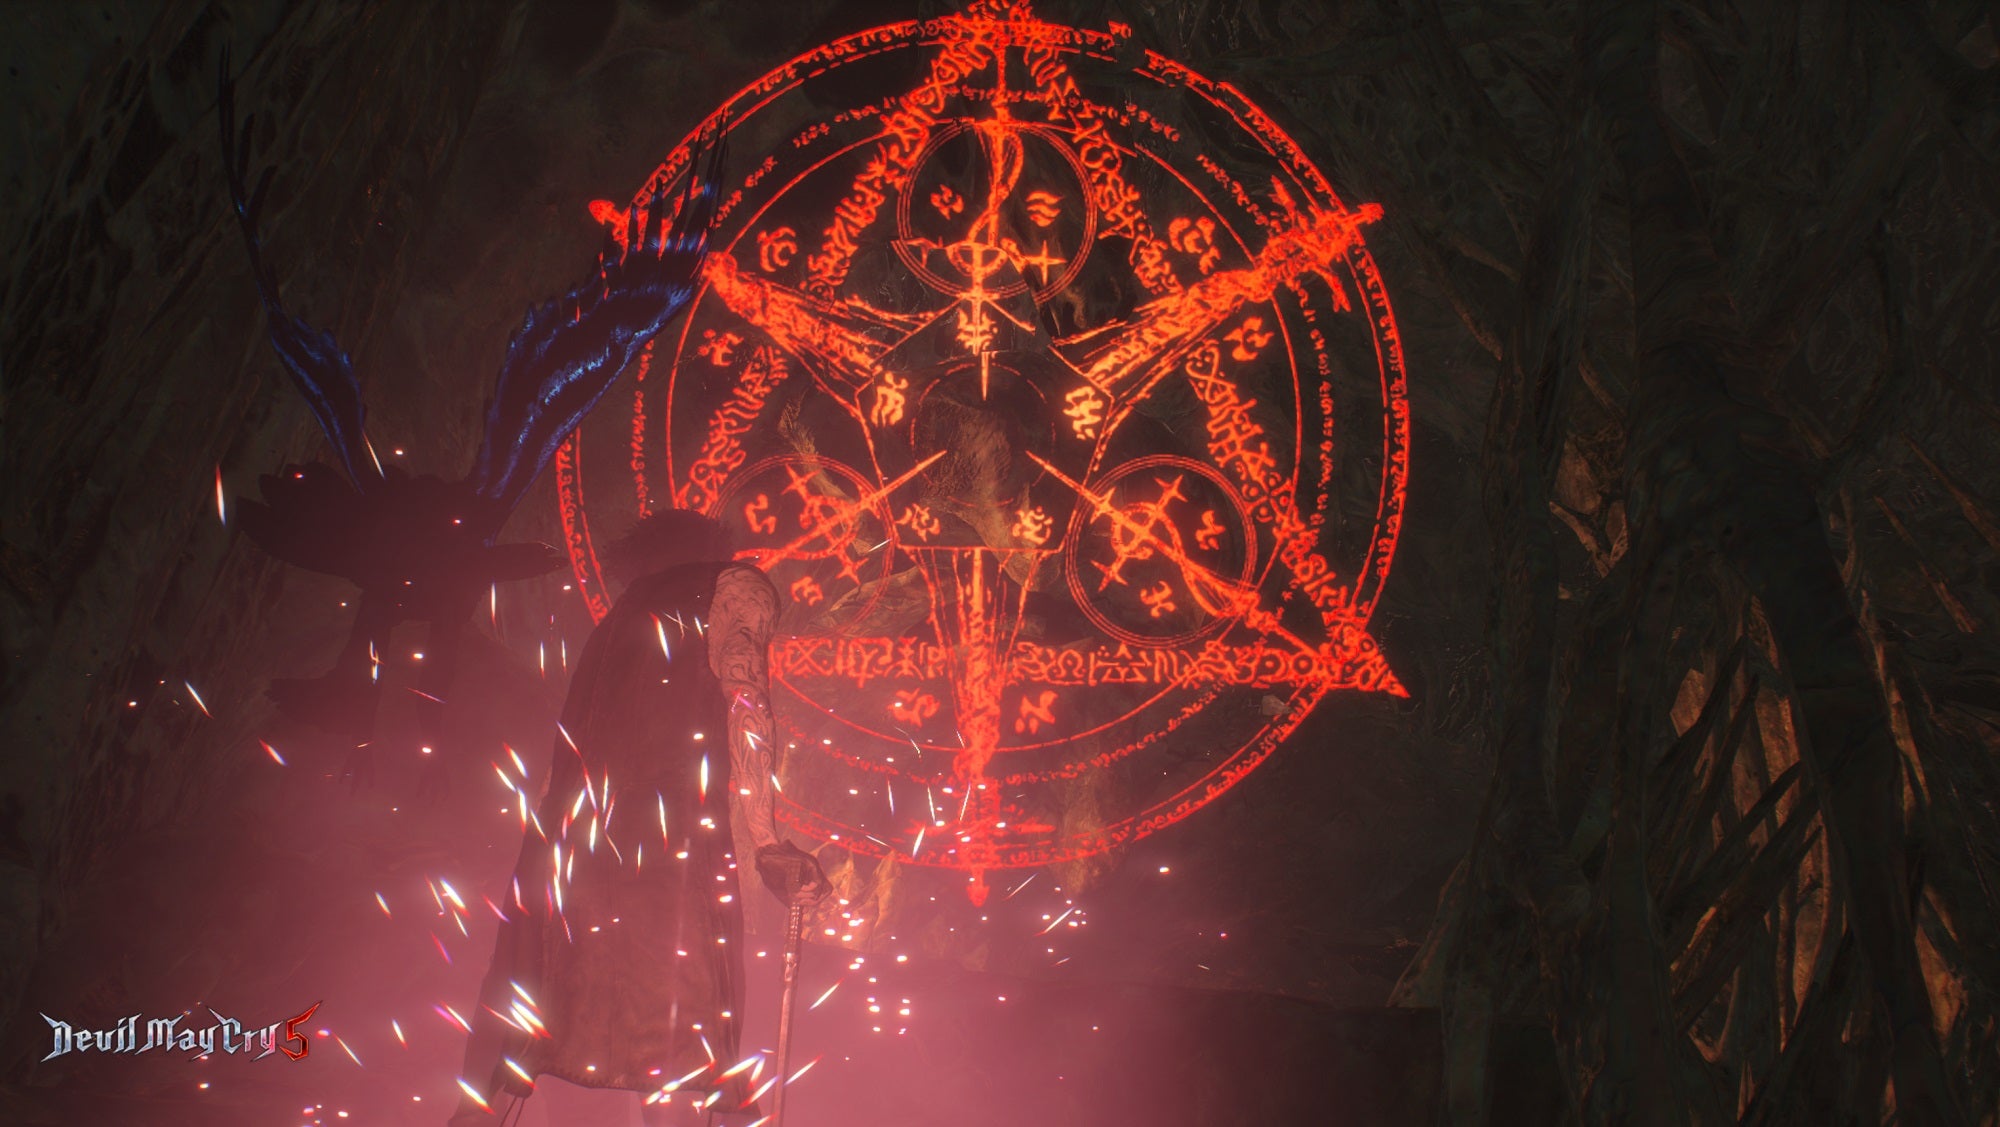 Image for Devil May Cry 5 Secret Missions - find and complete all DMC 5 Secret Missions